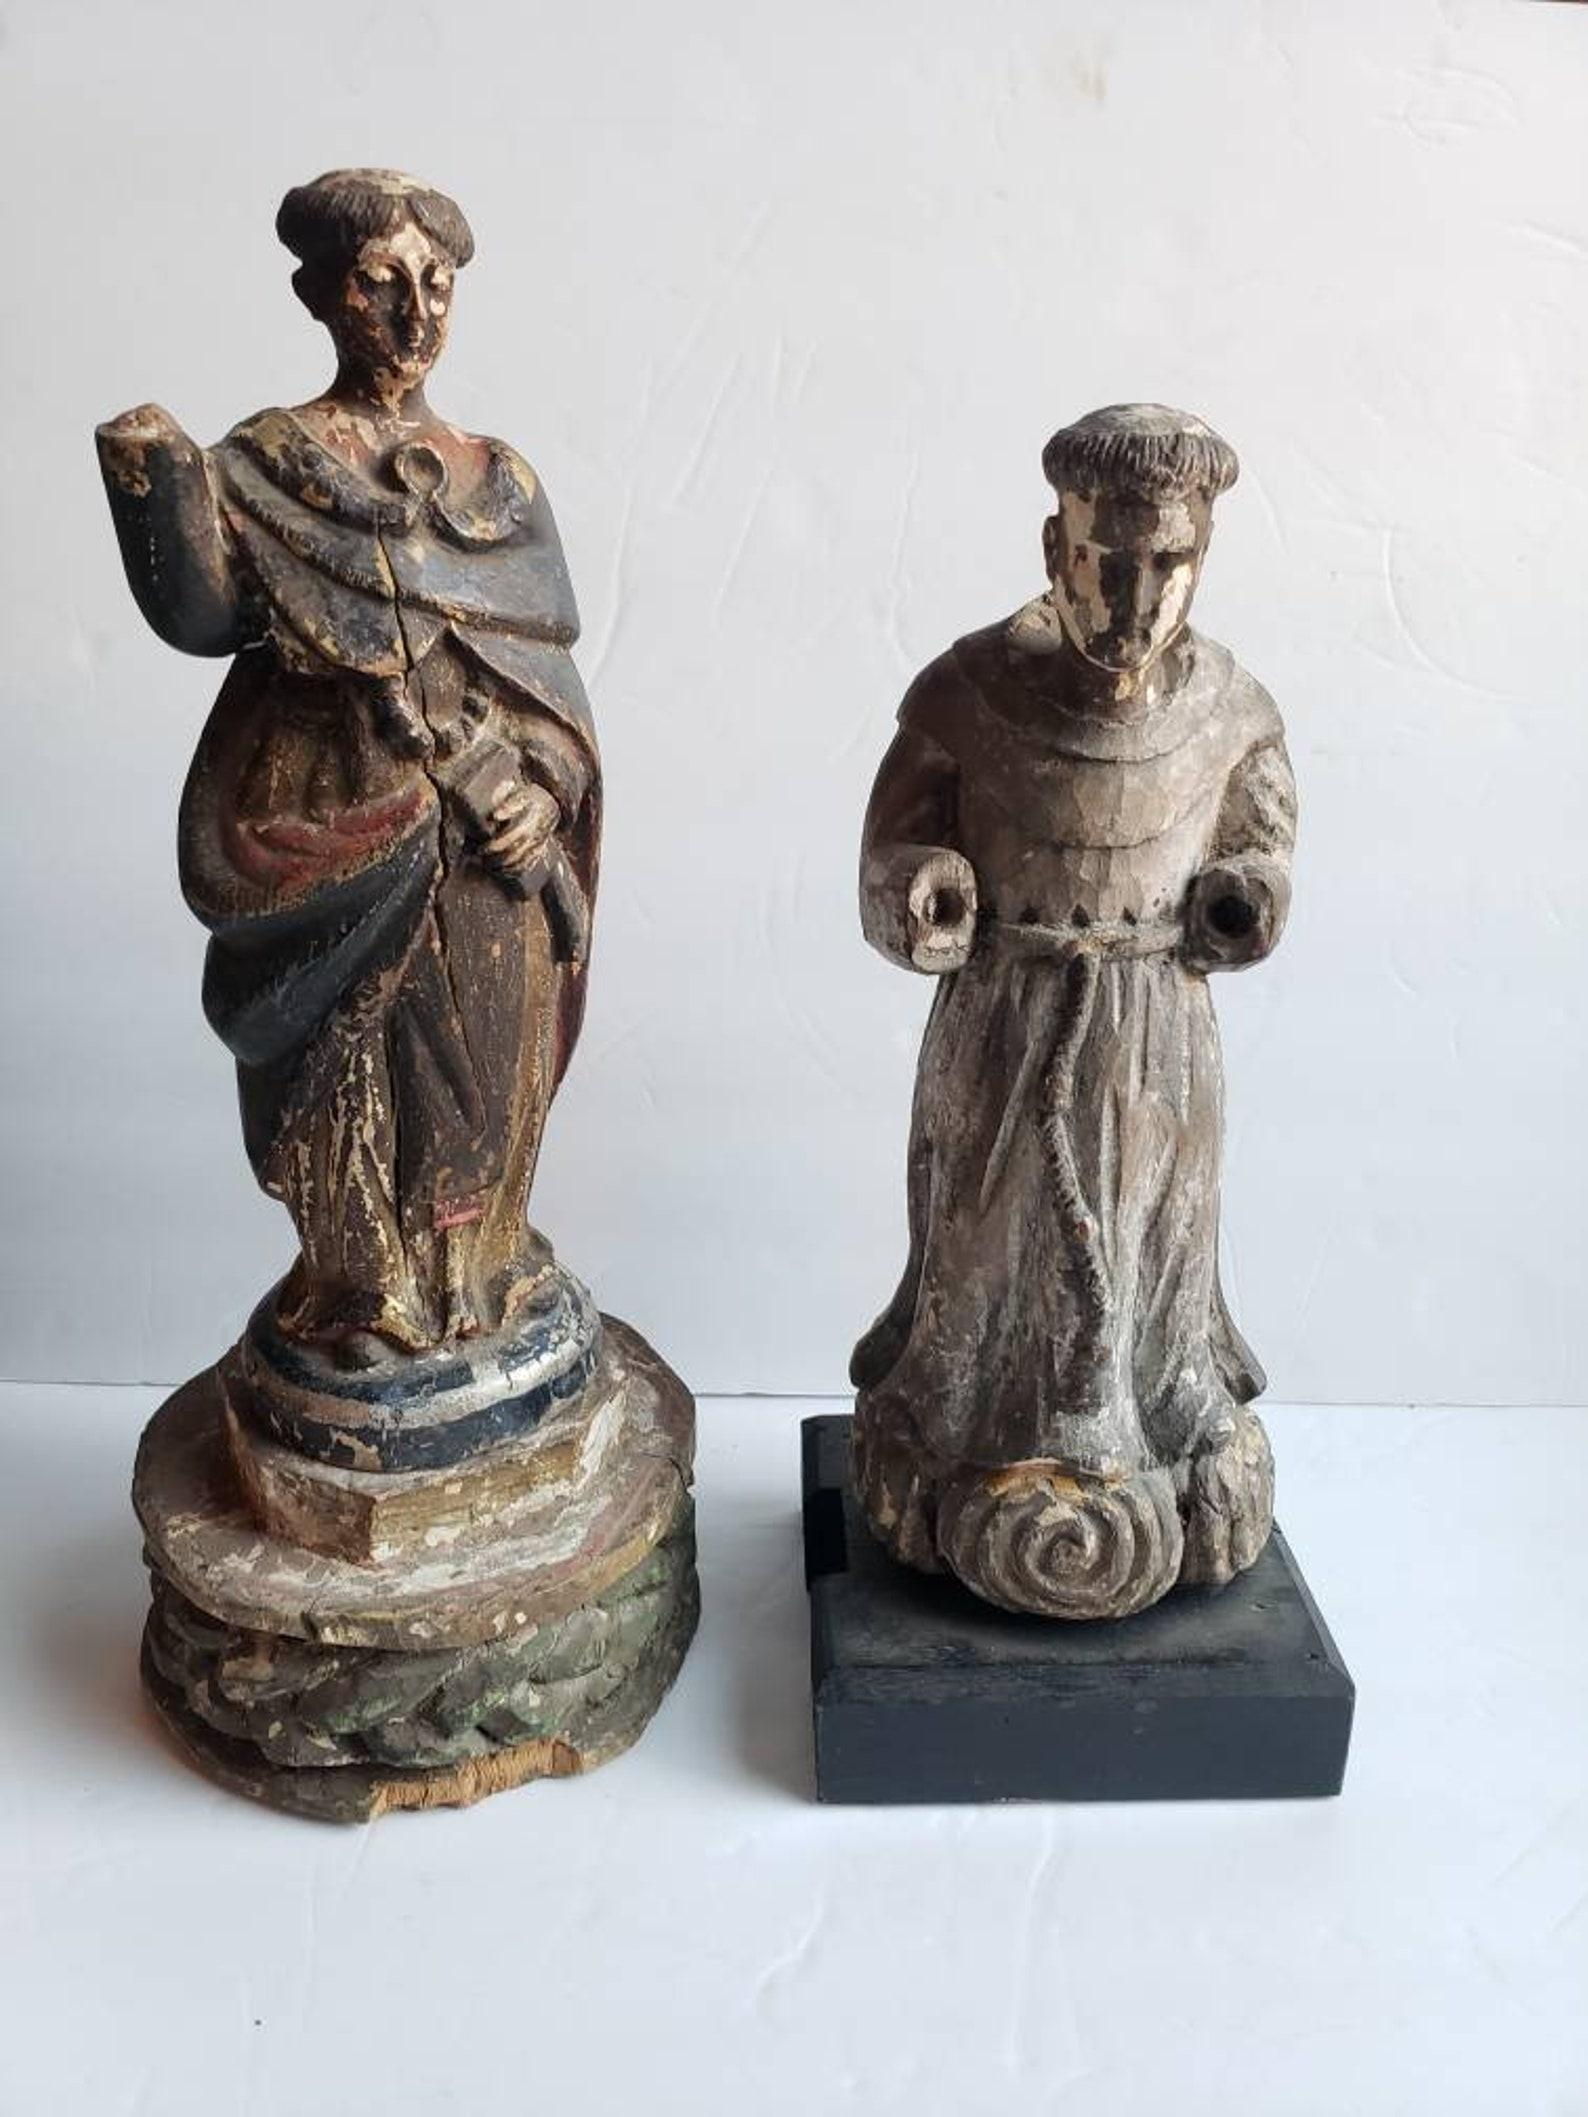 A pair of antique Spanish Colonial Santos church altar figures - religious folk art statue - sculpture. Born in the 19th century, hand carved and polychrome painted wood and gesso, each depicting ecclesiastical figures in Franciscan monk habit. One